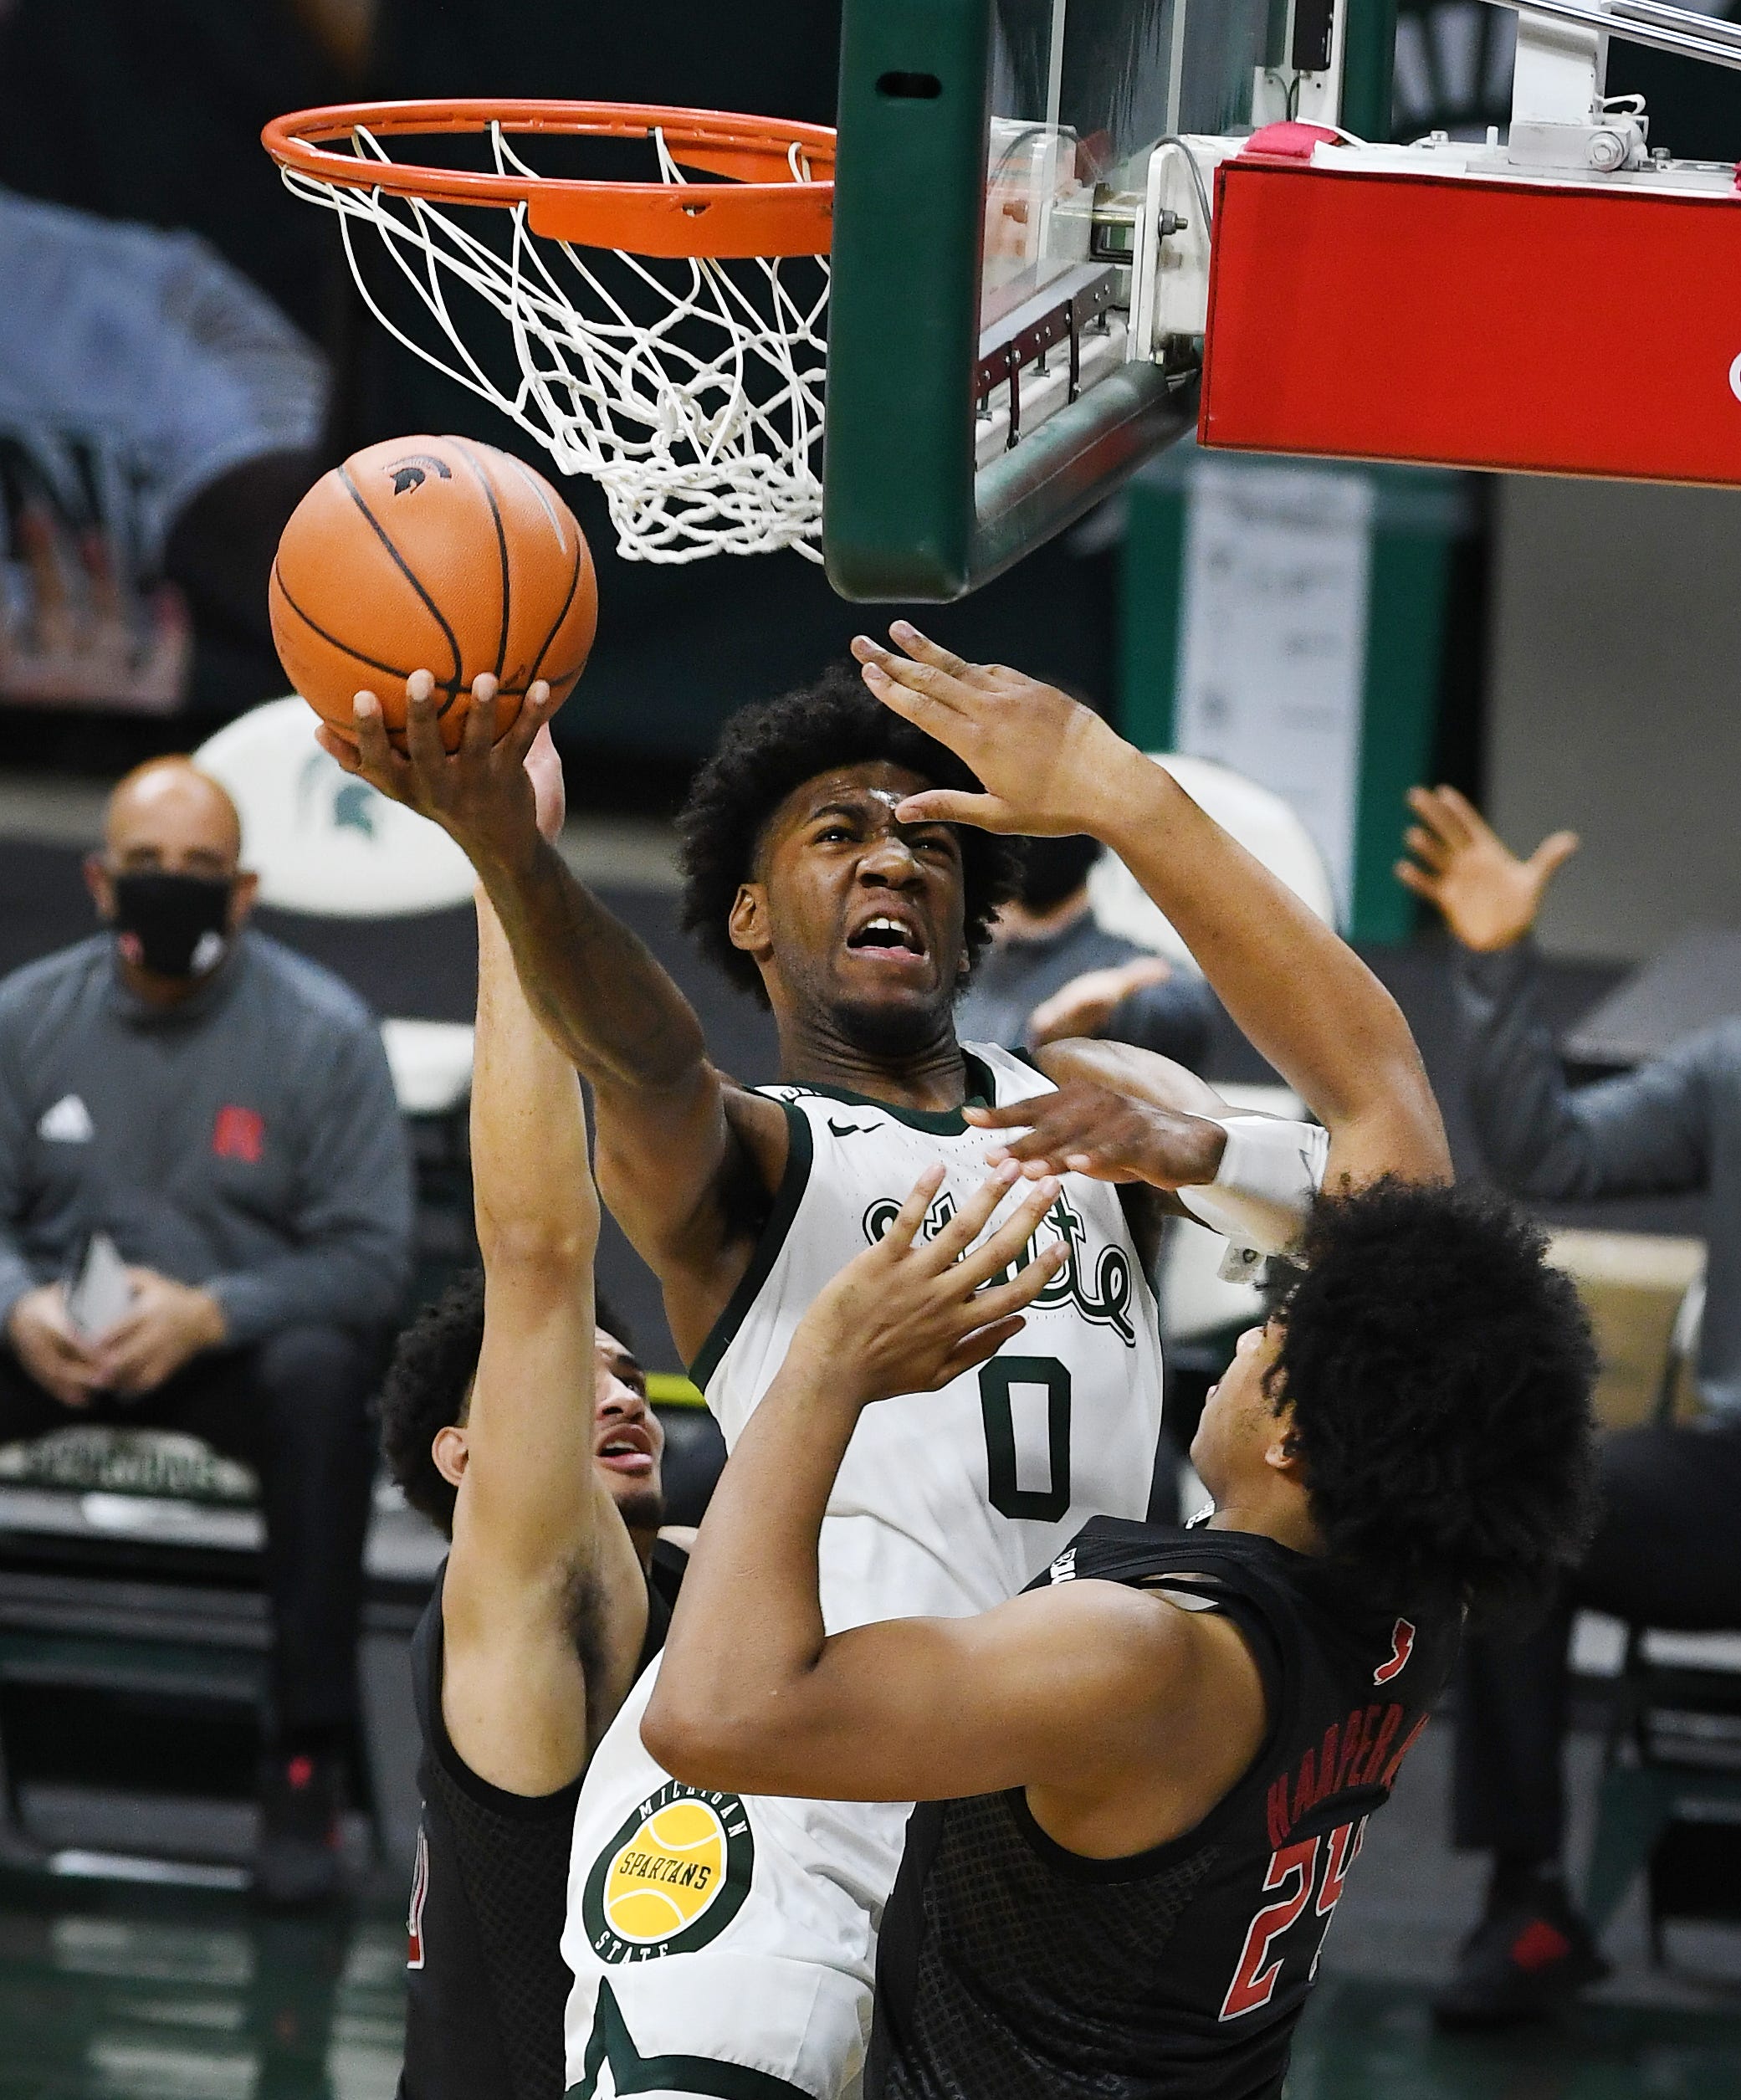 Aaron Henry from Michigan State fighting under the basket in the first half.  Henry finished on 20 points in MSU's 68-45 win over Rutgers on Tuesday.